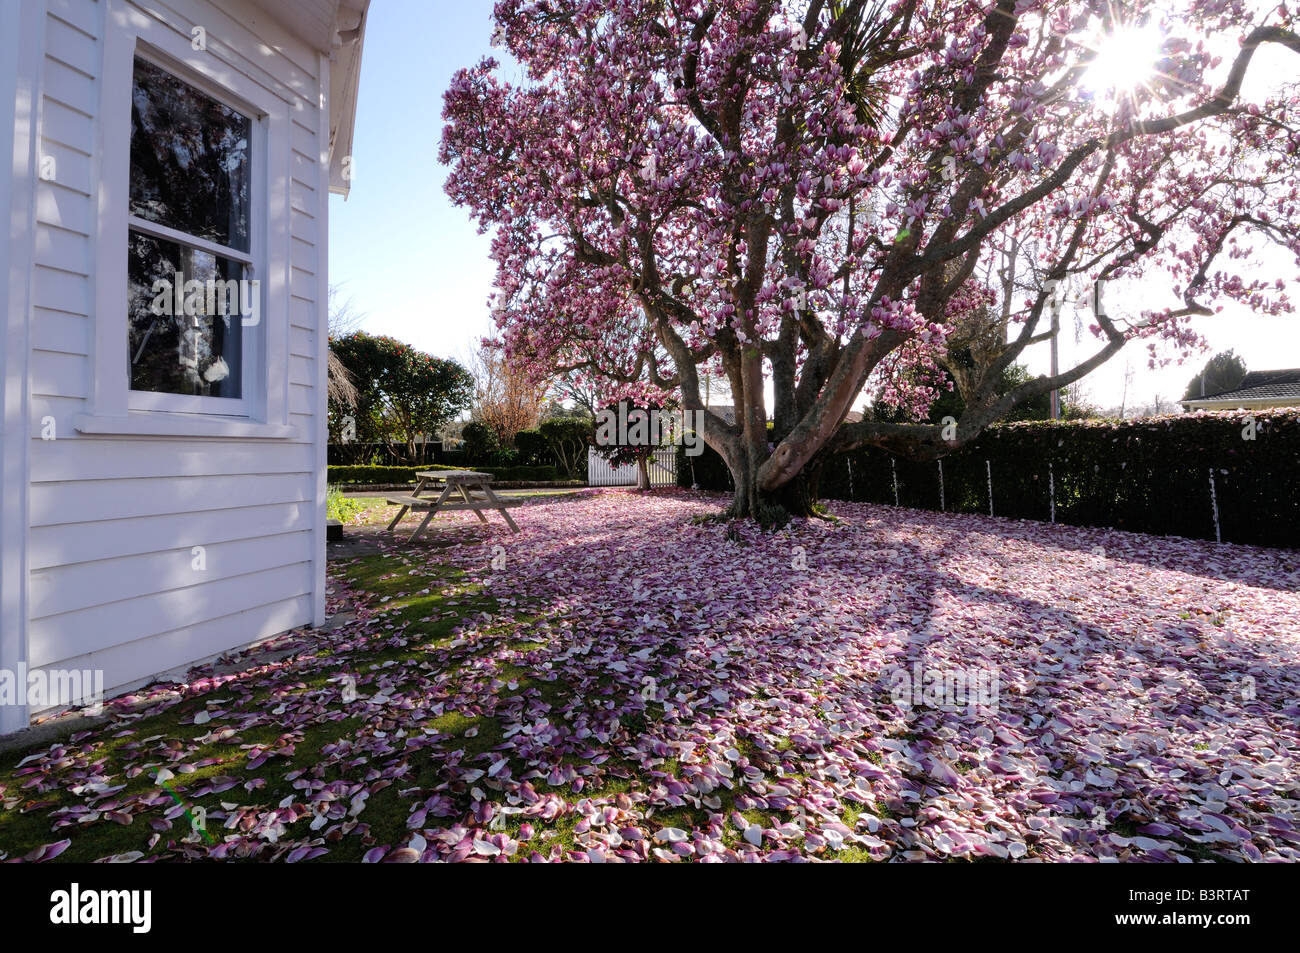 New Zealand house with Magnolia tree and fallen petals, scattering front garden, Cambridge, New Zealand. Stock Photo